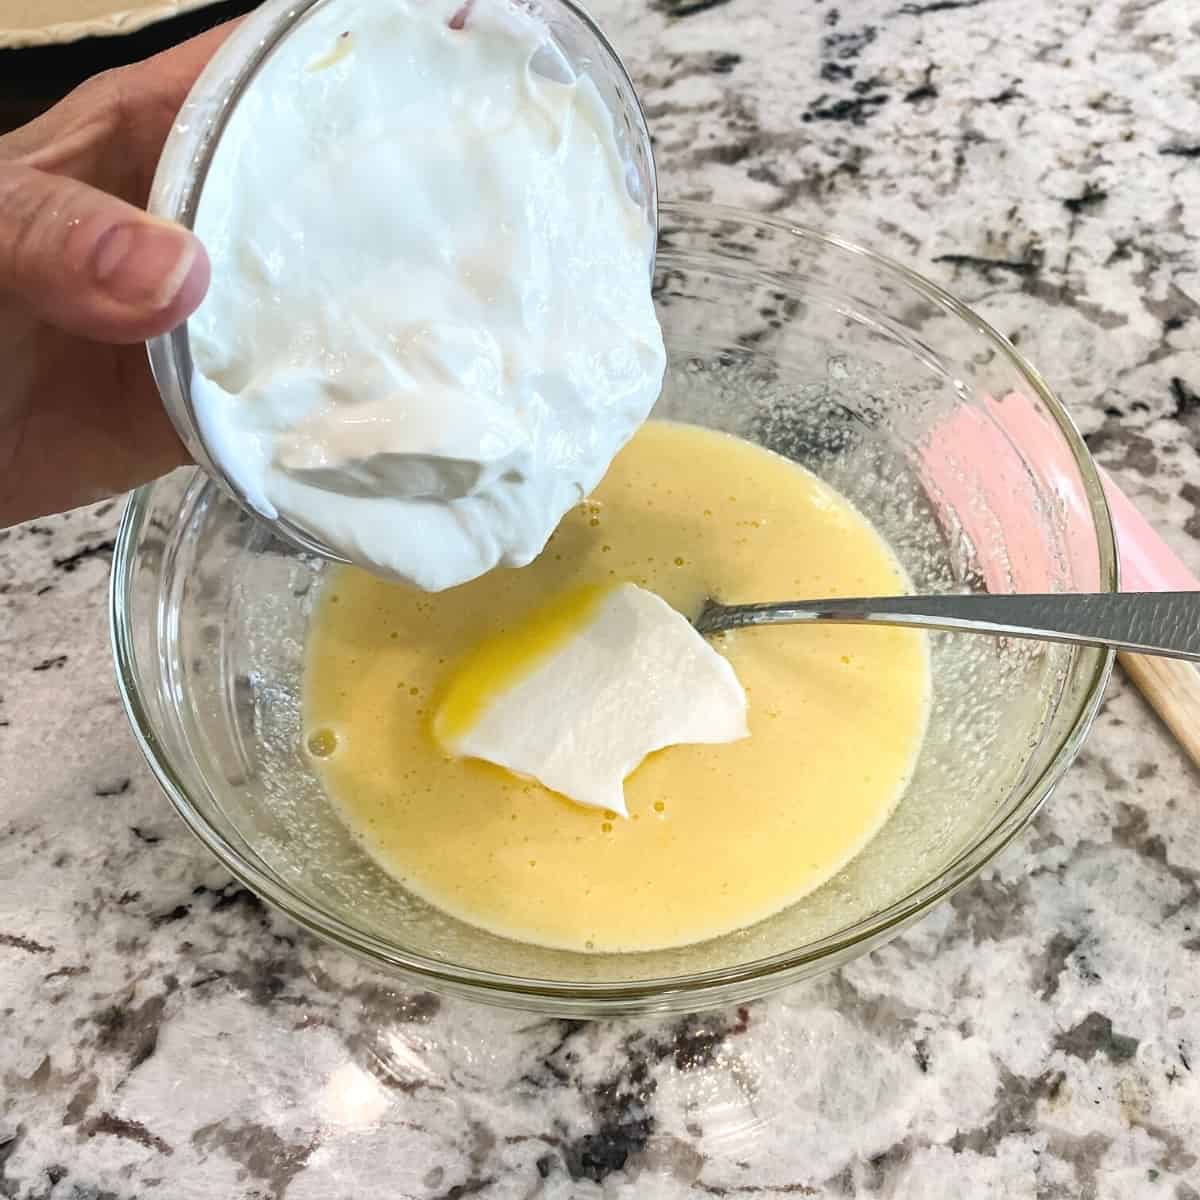 Sour cream is added to the egg mixture in a medium sized glass bowl.